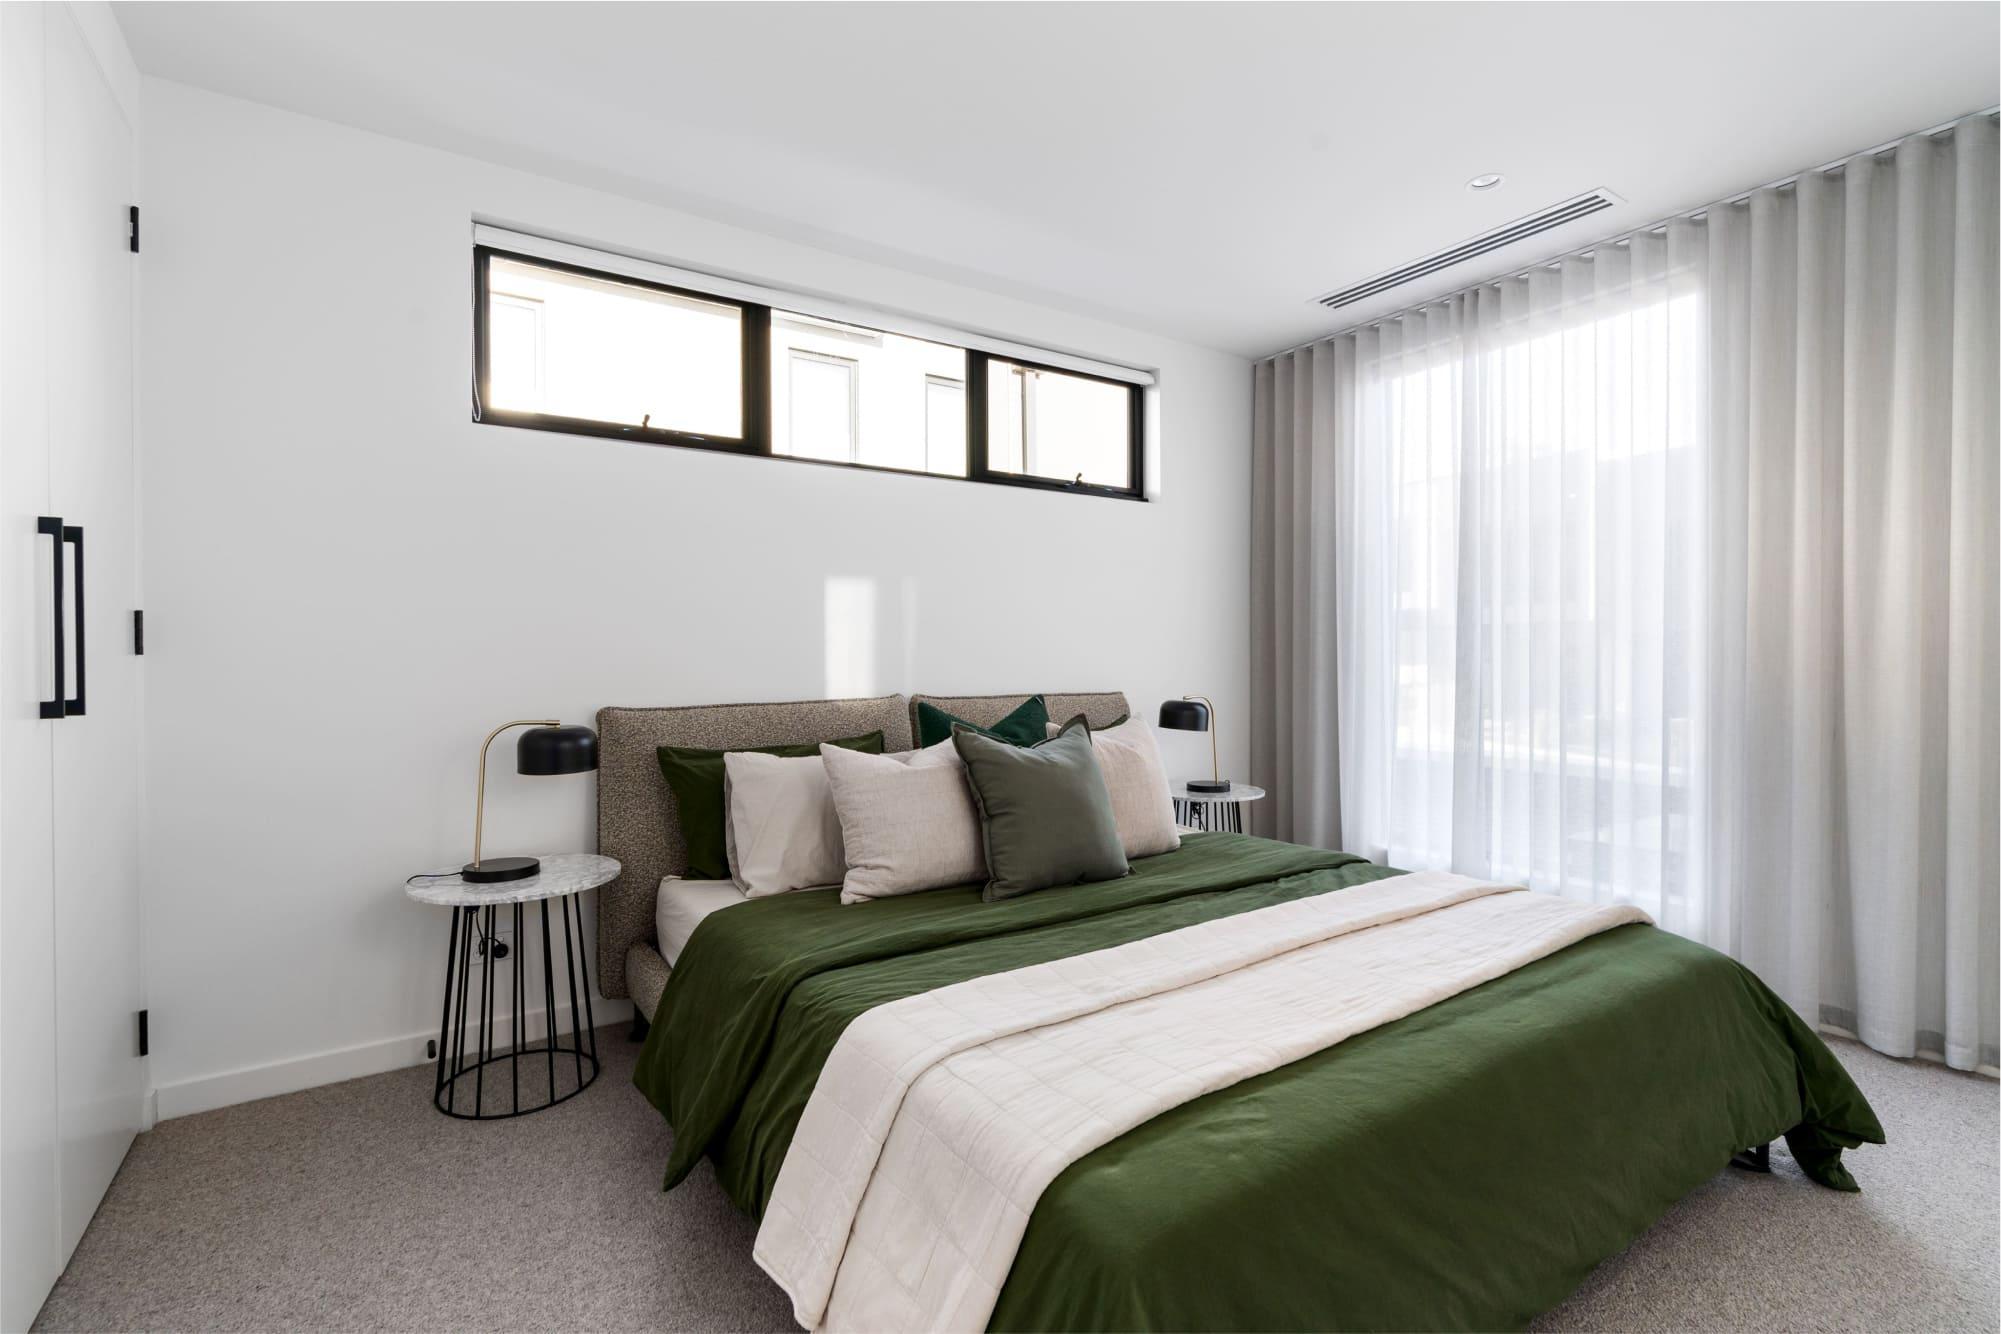 A modern bedroom with a tonal colour palette